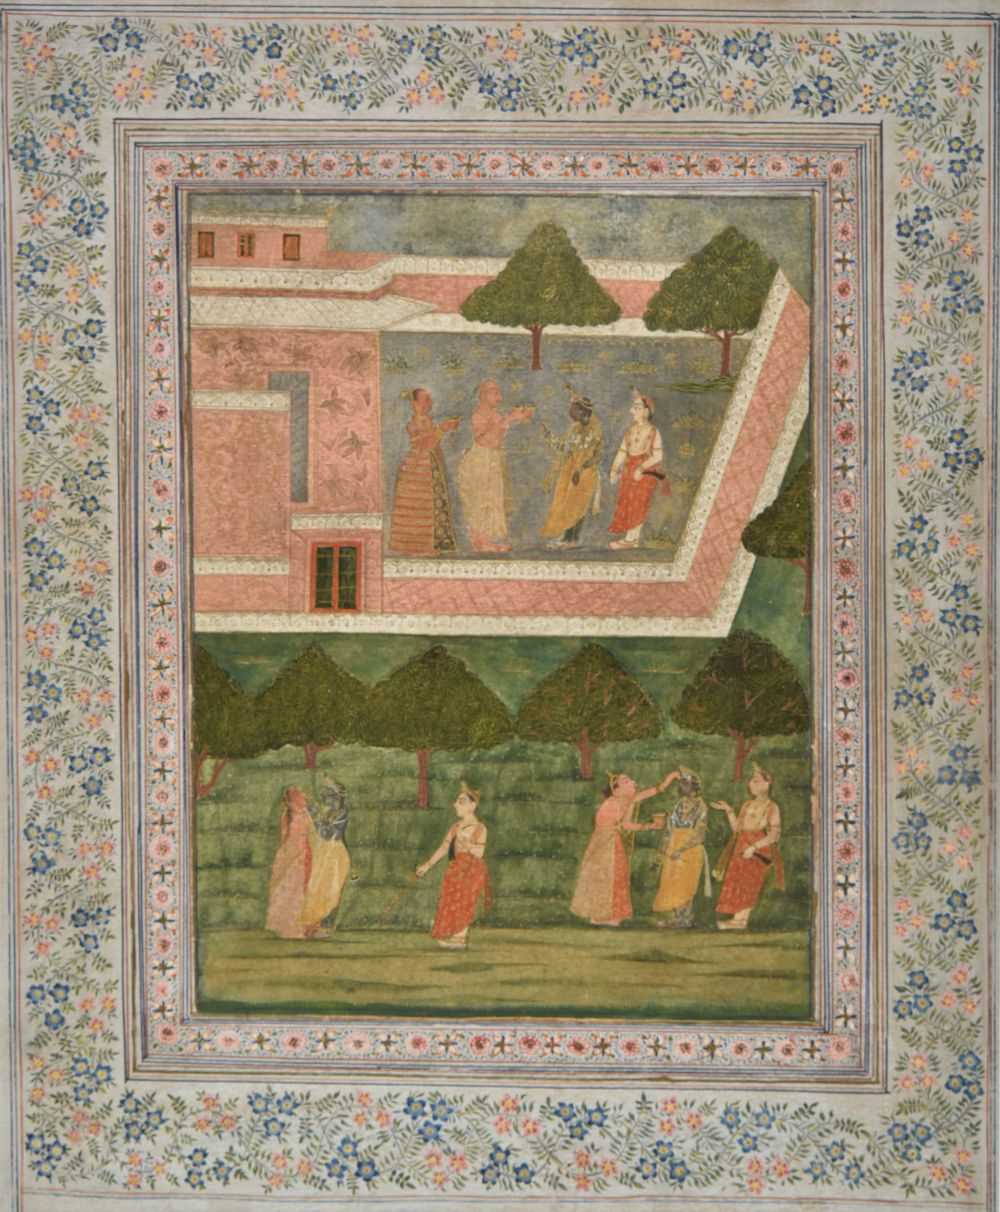 Lot 331 - Mughal School. Court scene with female annointing ceremonies, 18th century